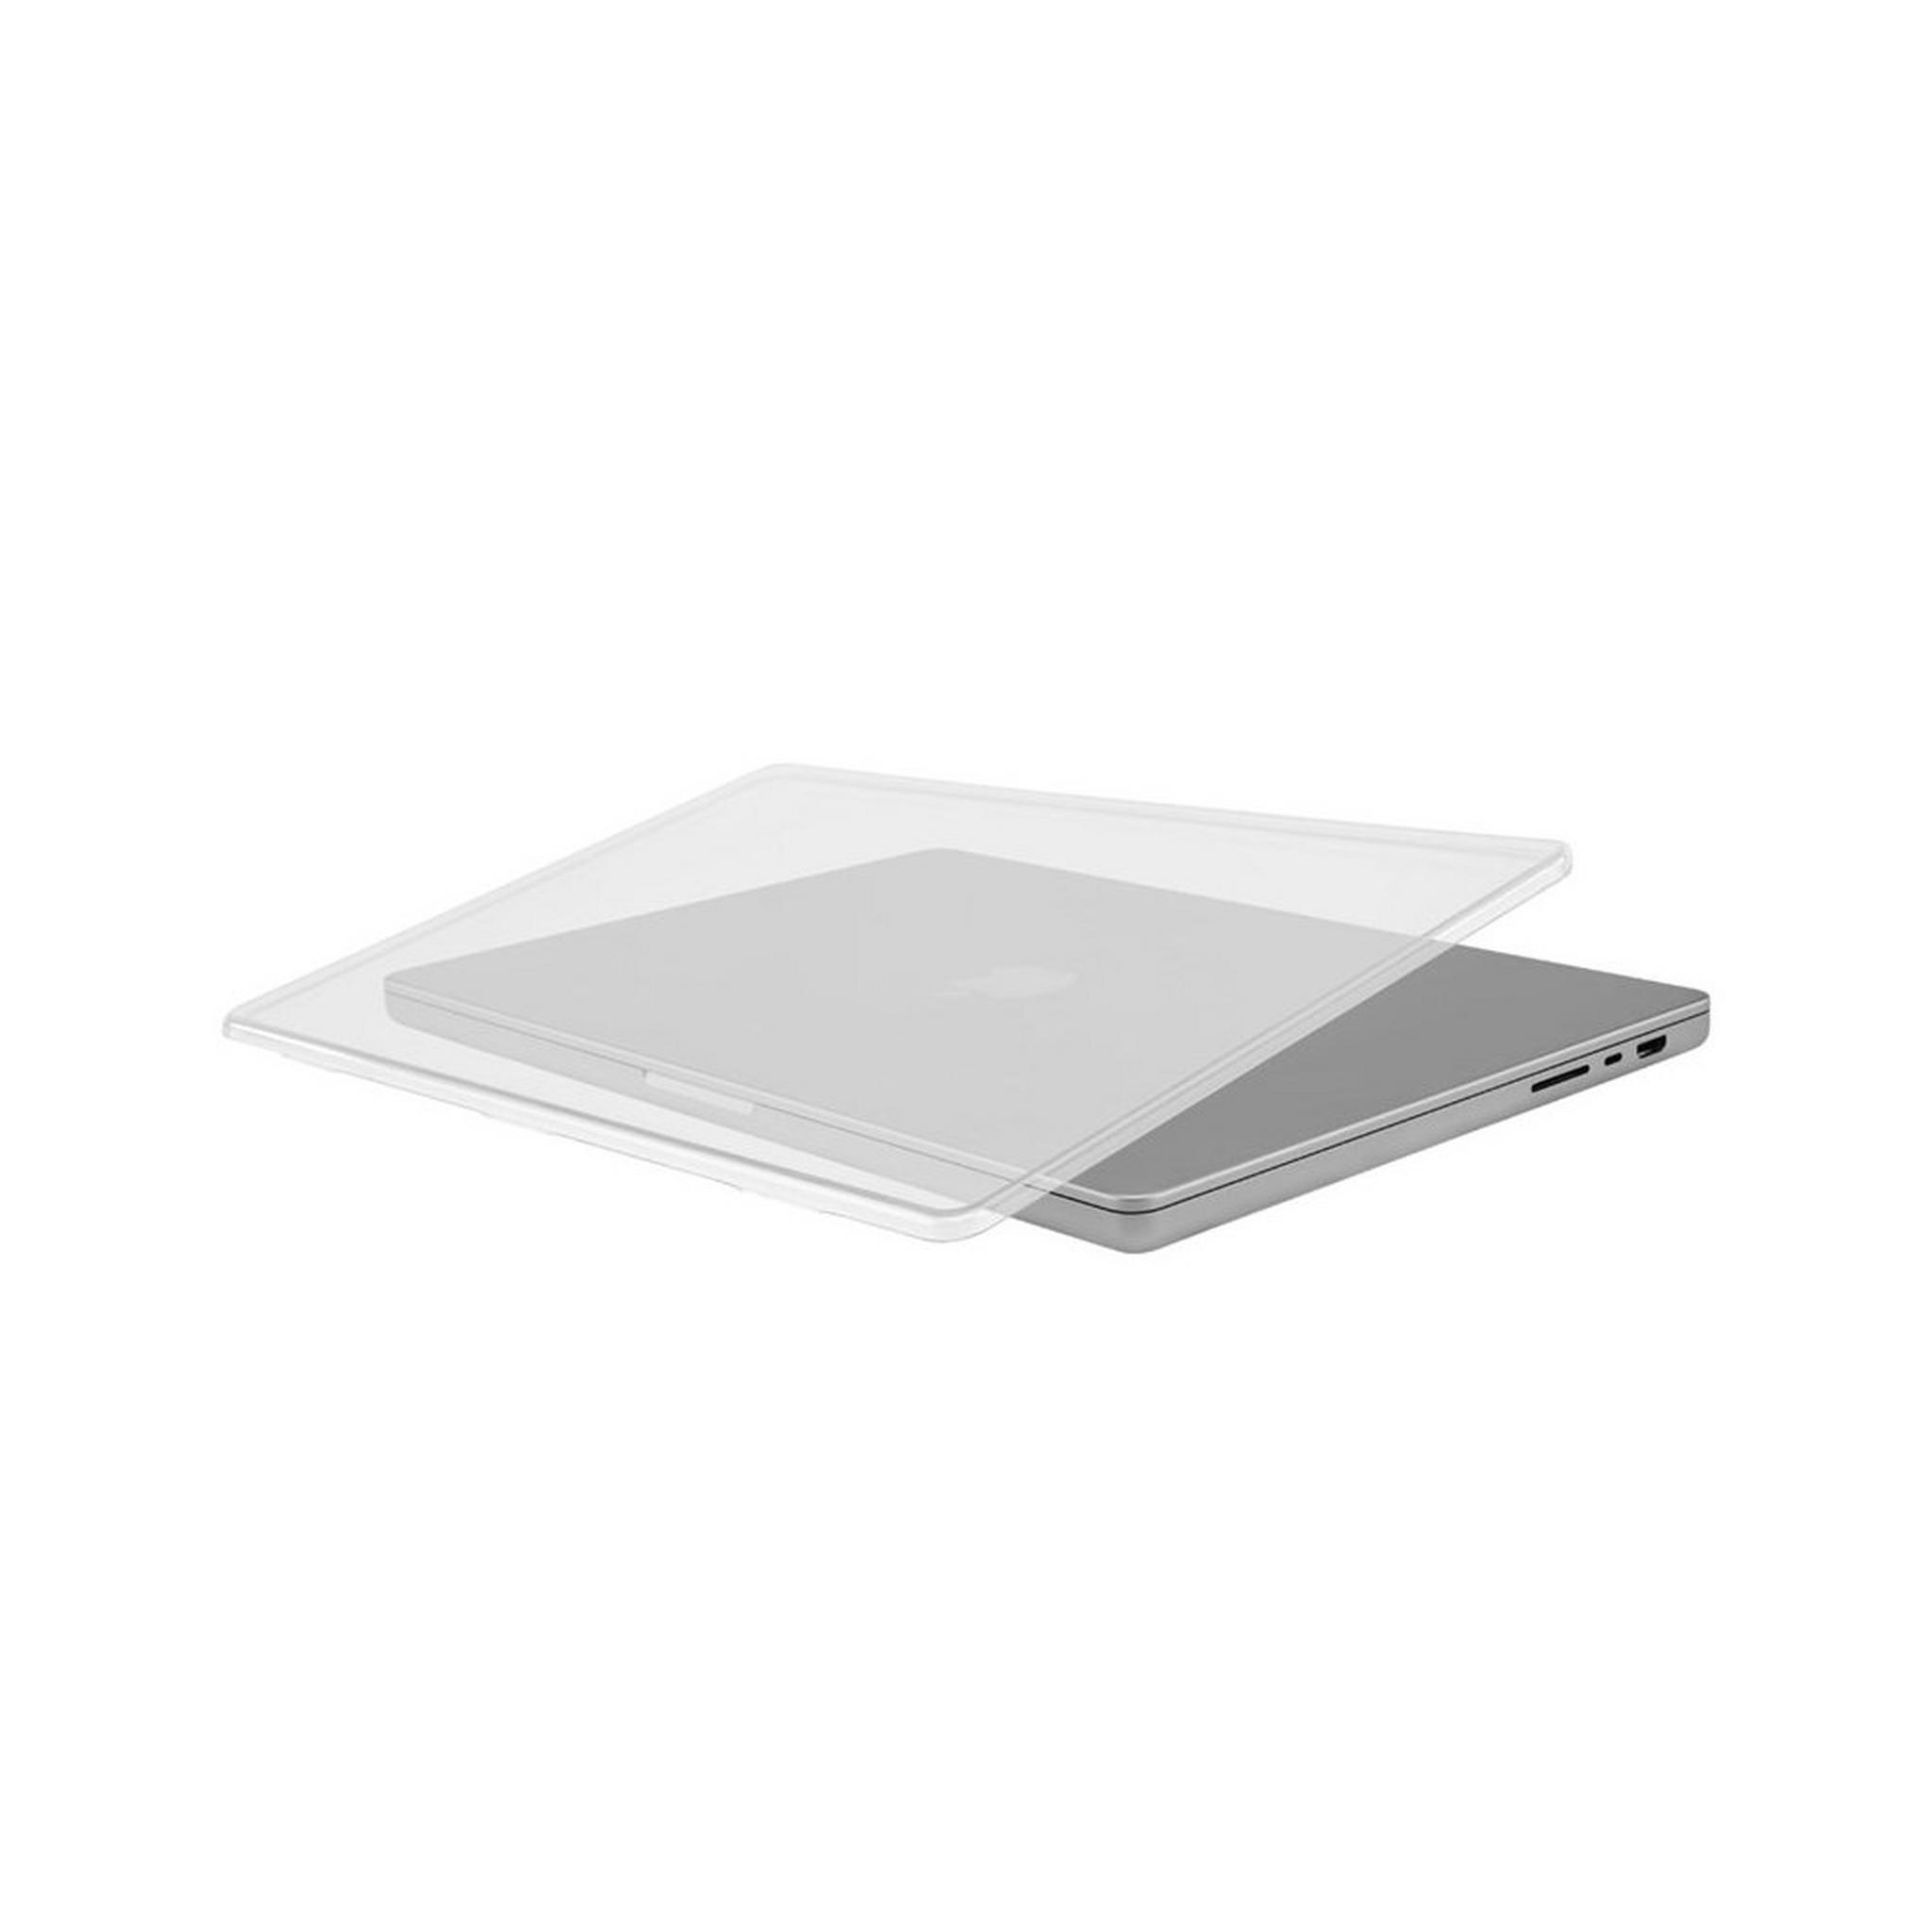 Case Mate Snap-On Case For Macbook Pro 16-inch, CM-CM048526 - Clear